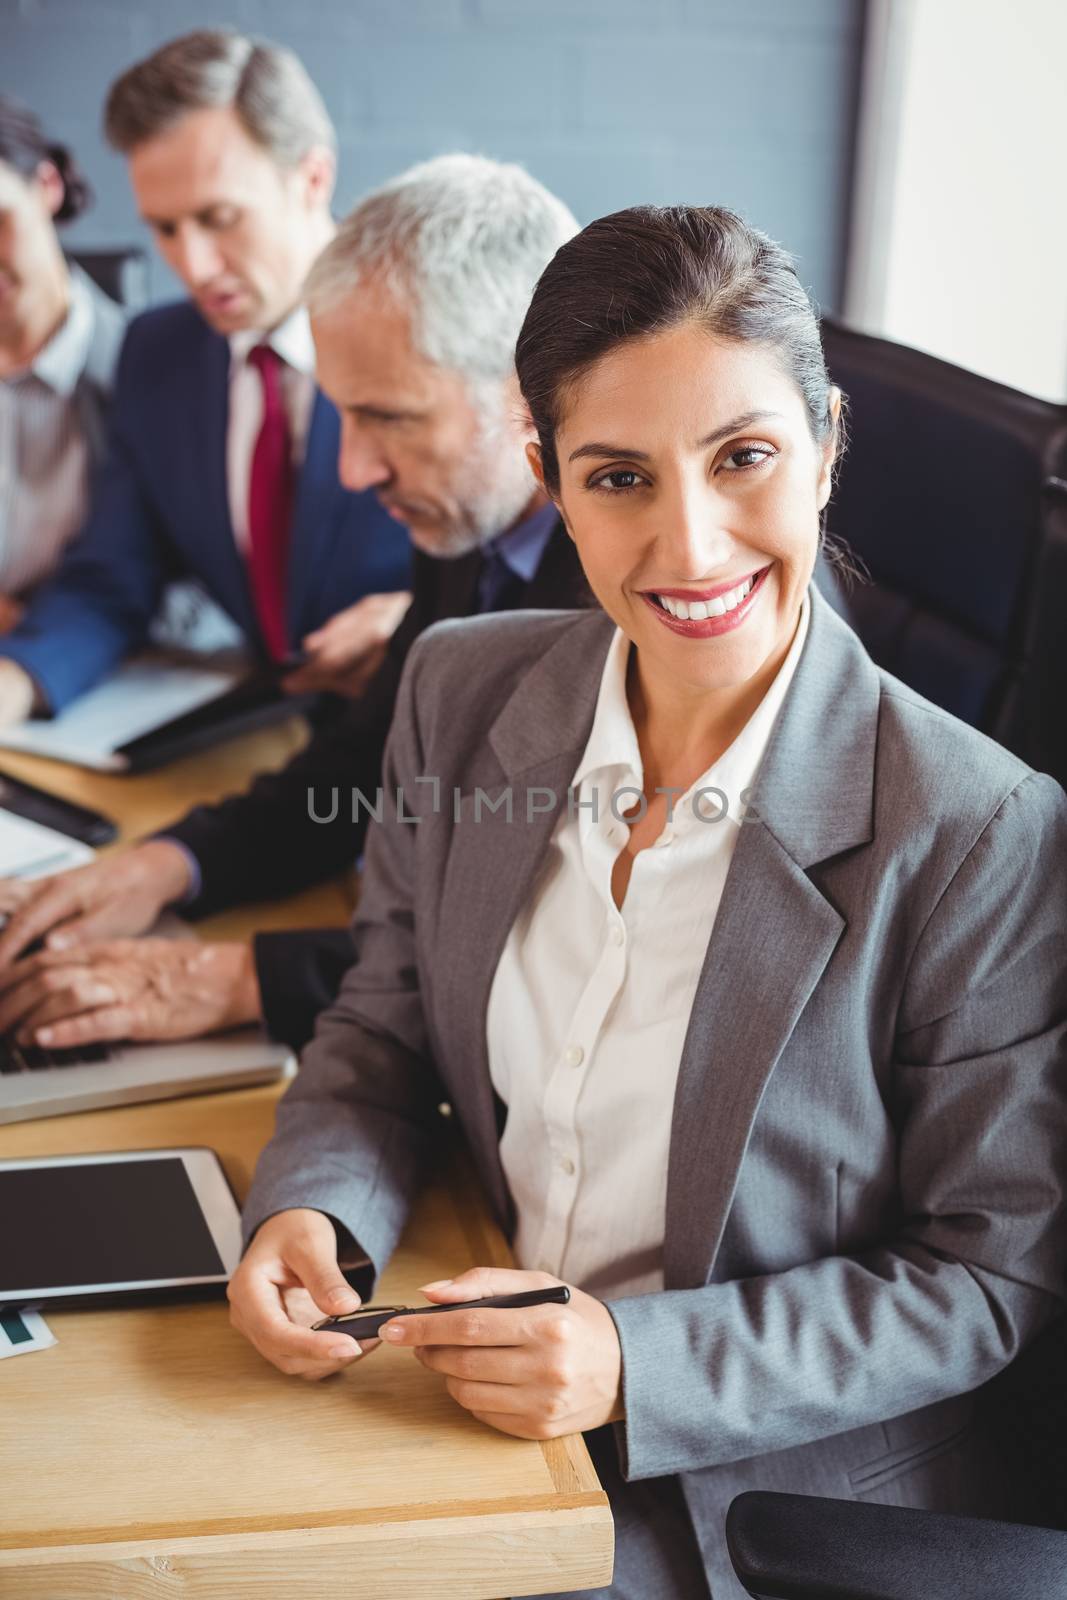 Businesswoman smiling at camera and businesspeople interacting in background in conference room during meeting